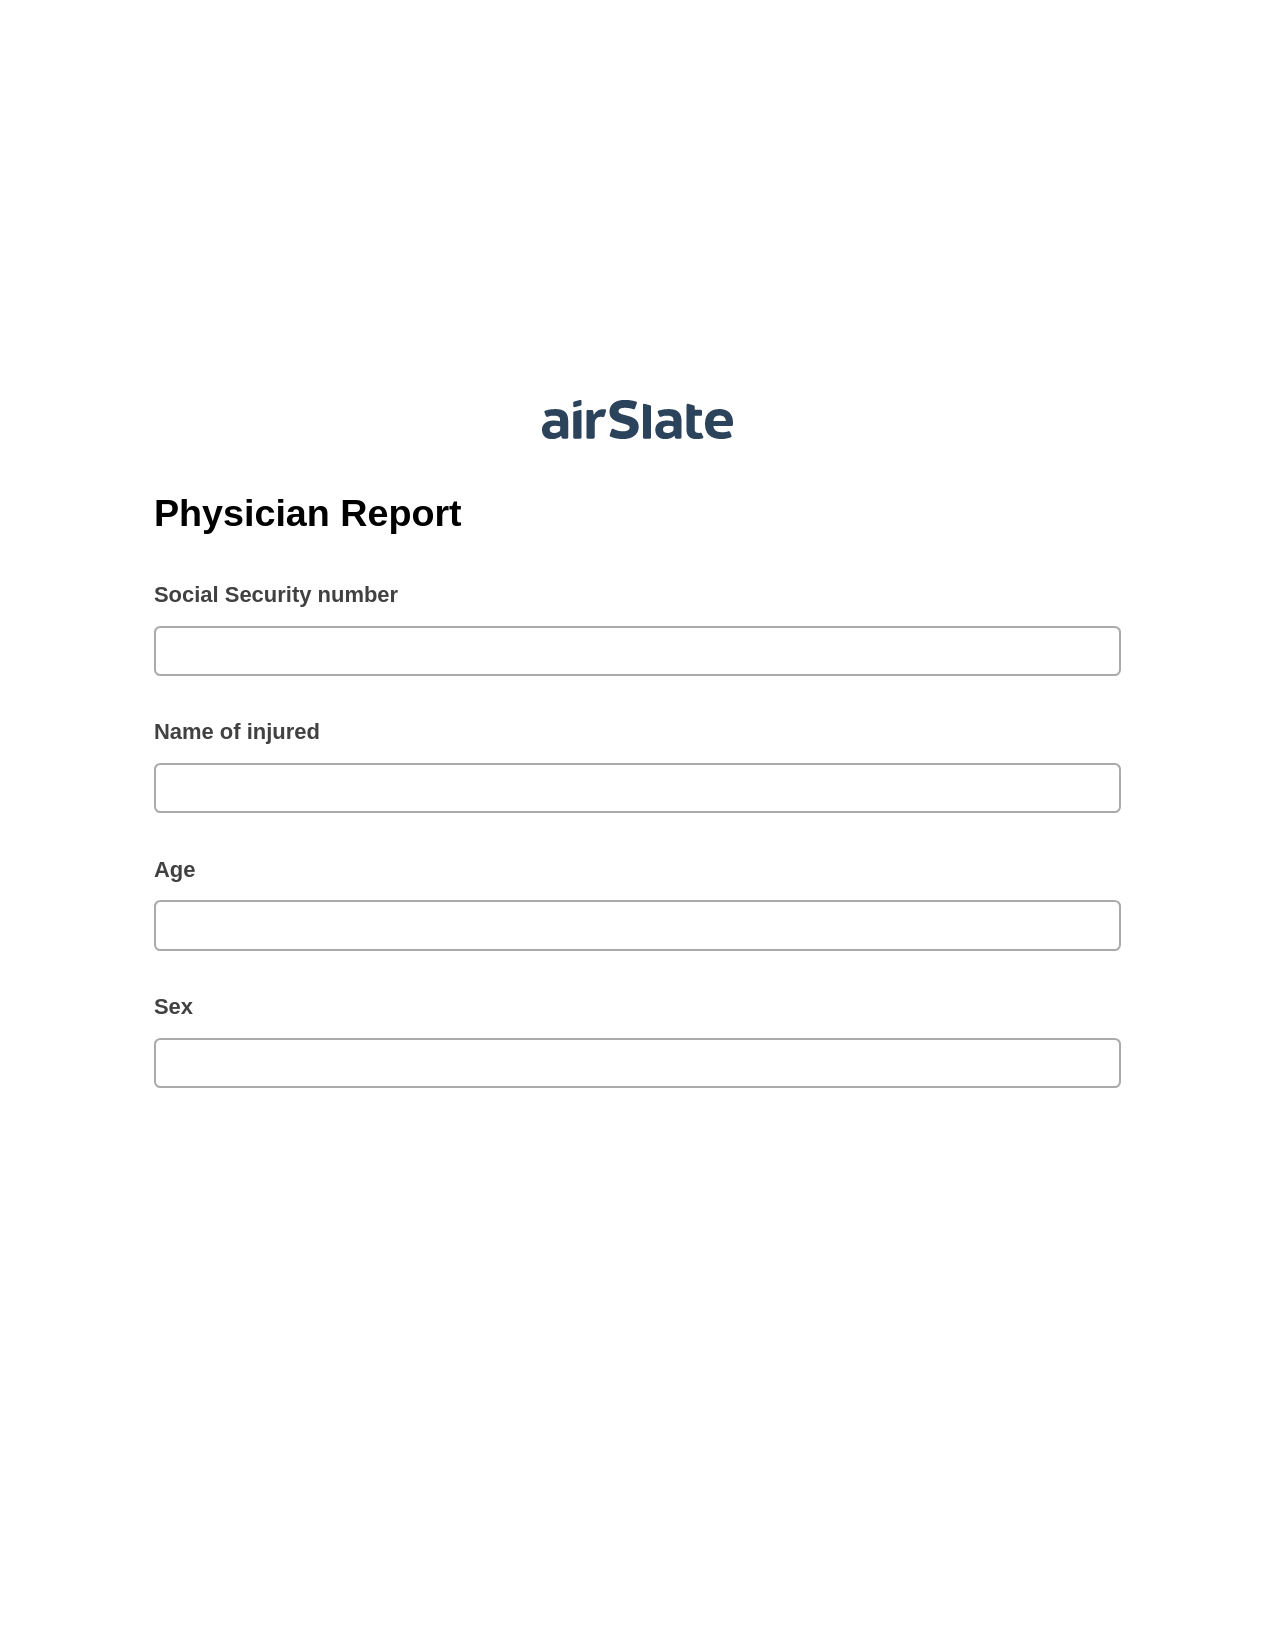 Physician Report Pre-fill from MySQL Bot, Send a Slate to MS Dynamics 365 Contact Bot, Archive to Dropbox Bot